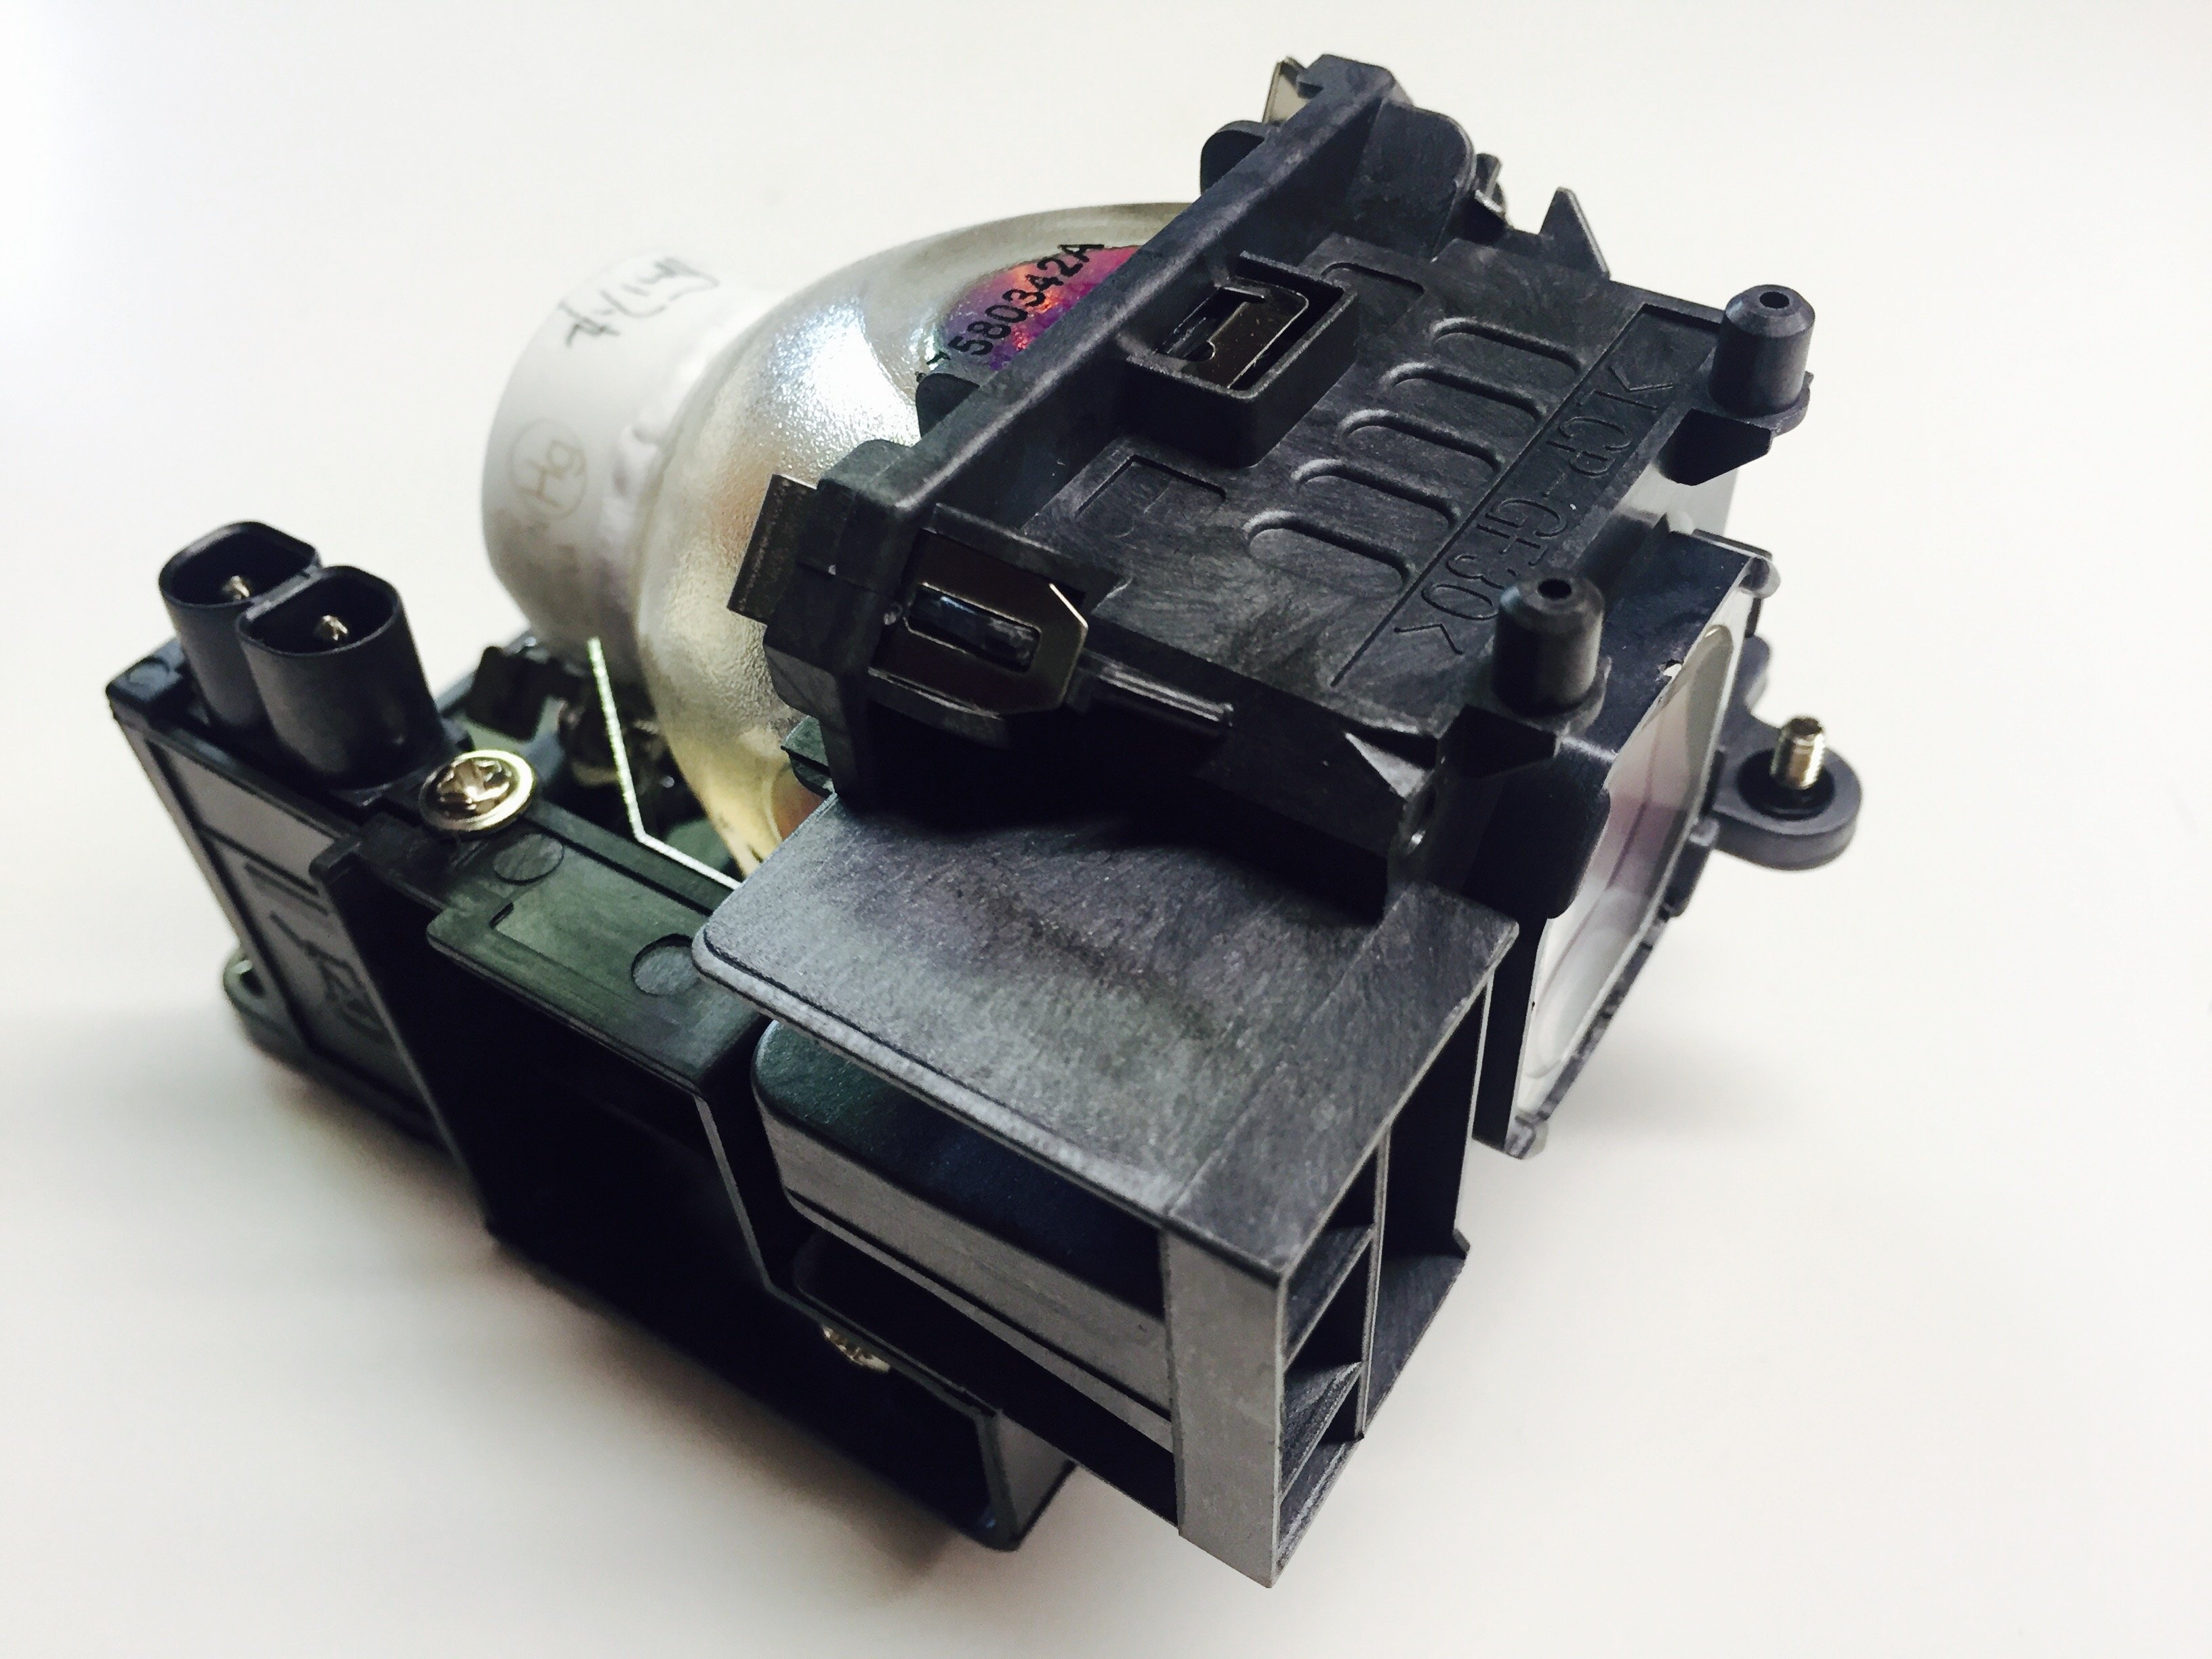 Original Ushio Replacement Lamp & Housing for the NEC NP-M260XS Projector - image 1 of 7